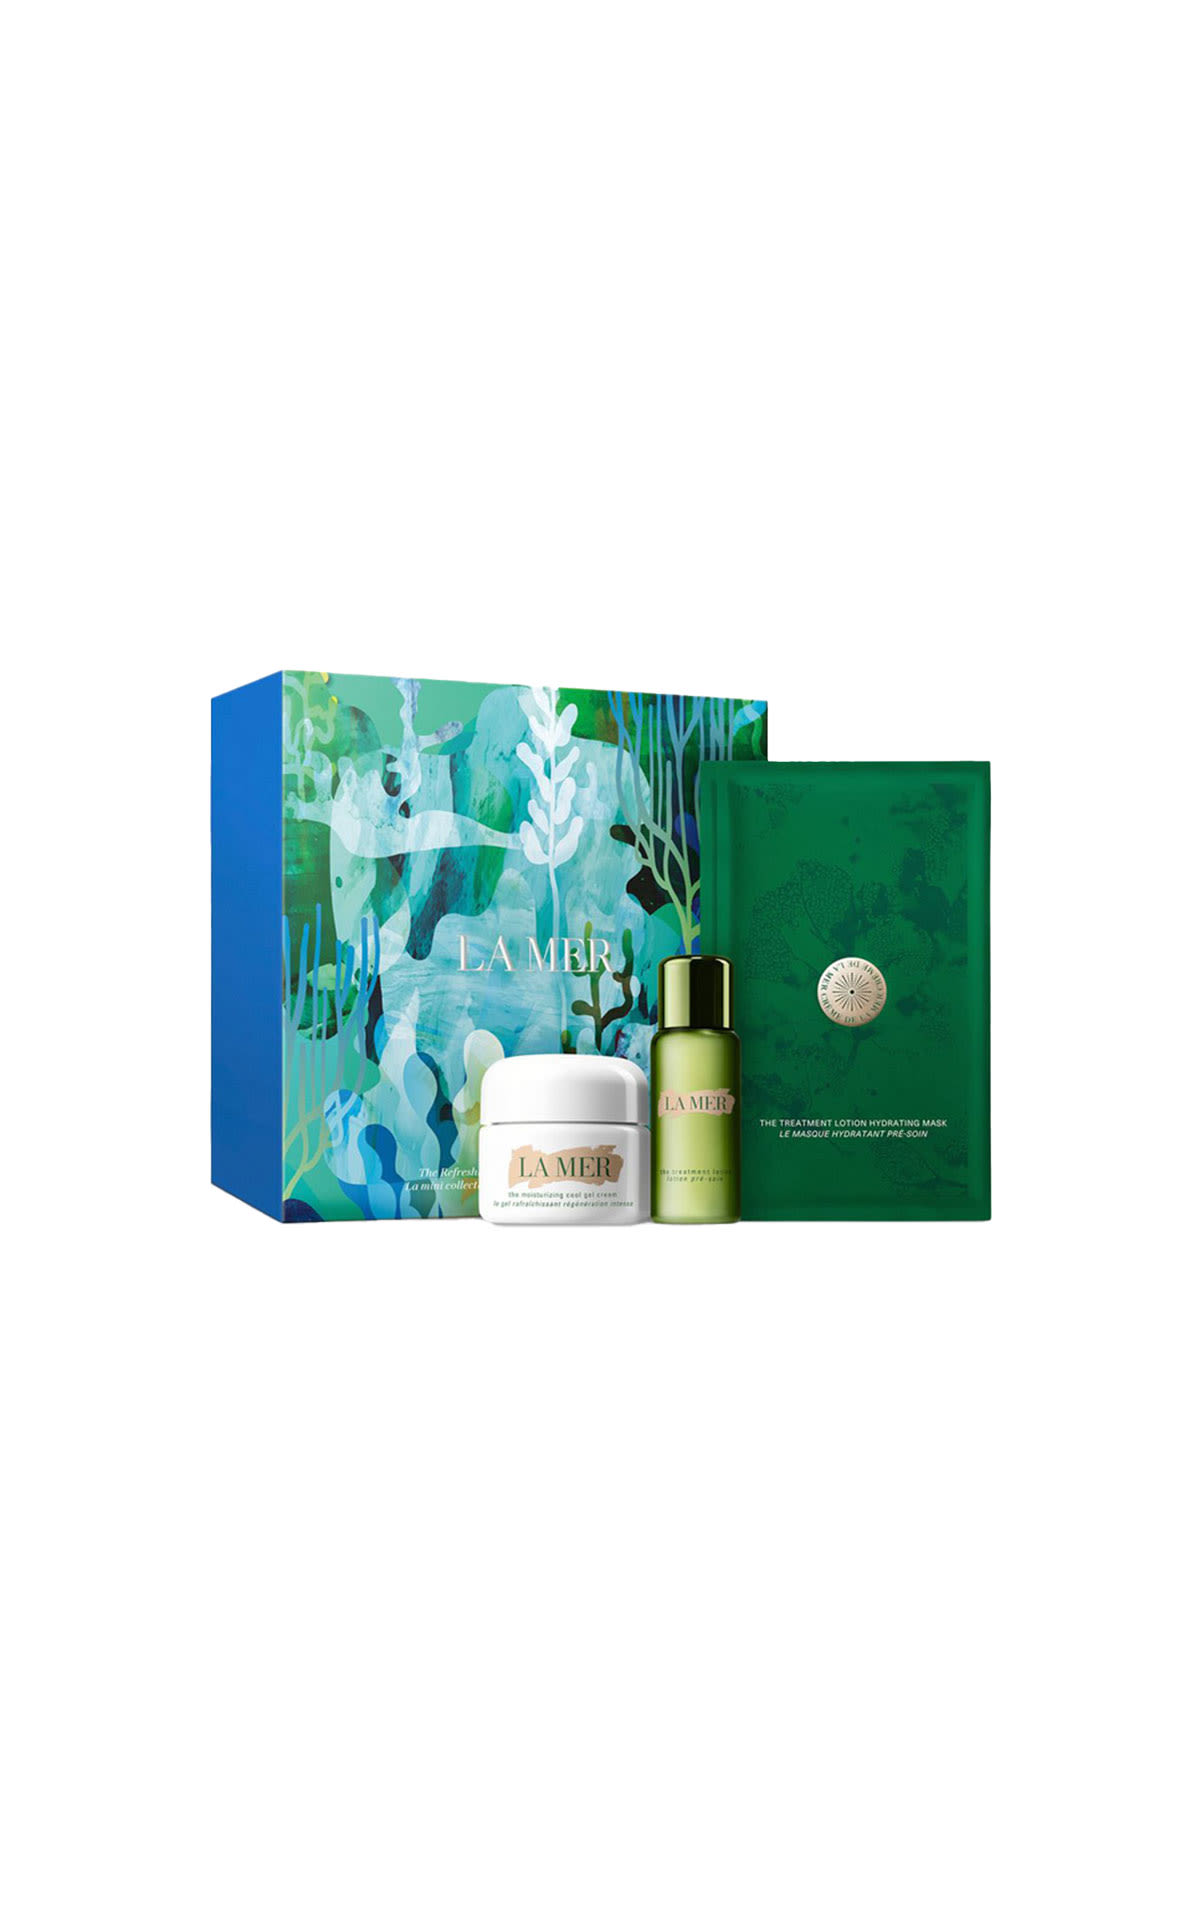 The Cosmetics Company Store The refreshing mini miracle broth collection from Bicester Village